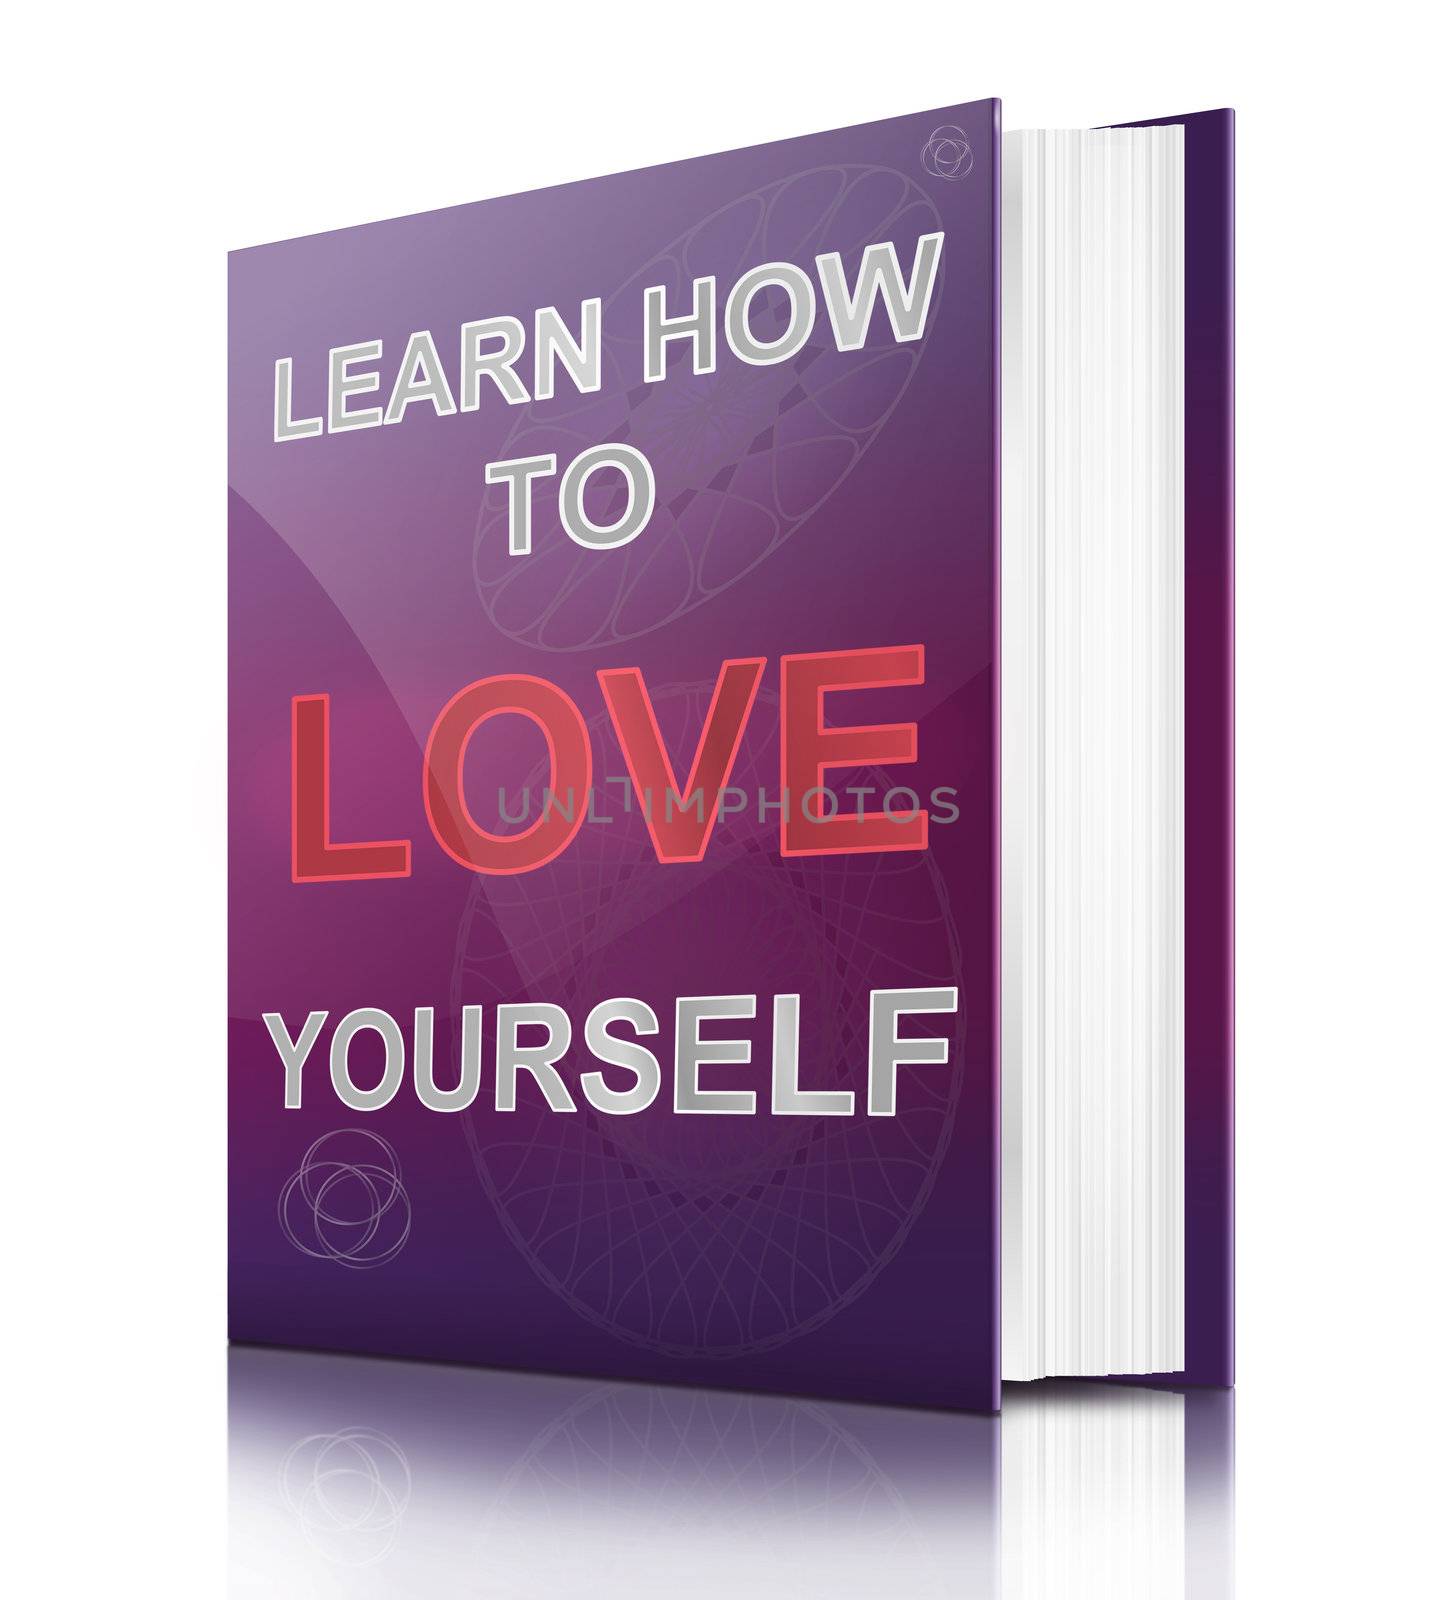 Learn to love yourself. by 72soul